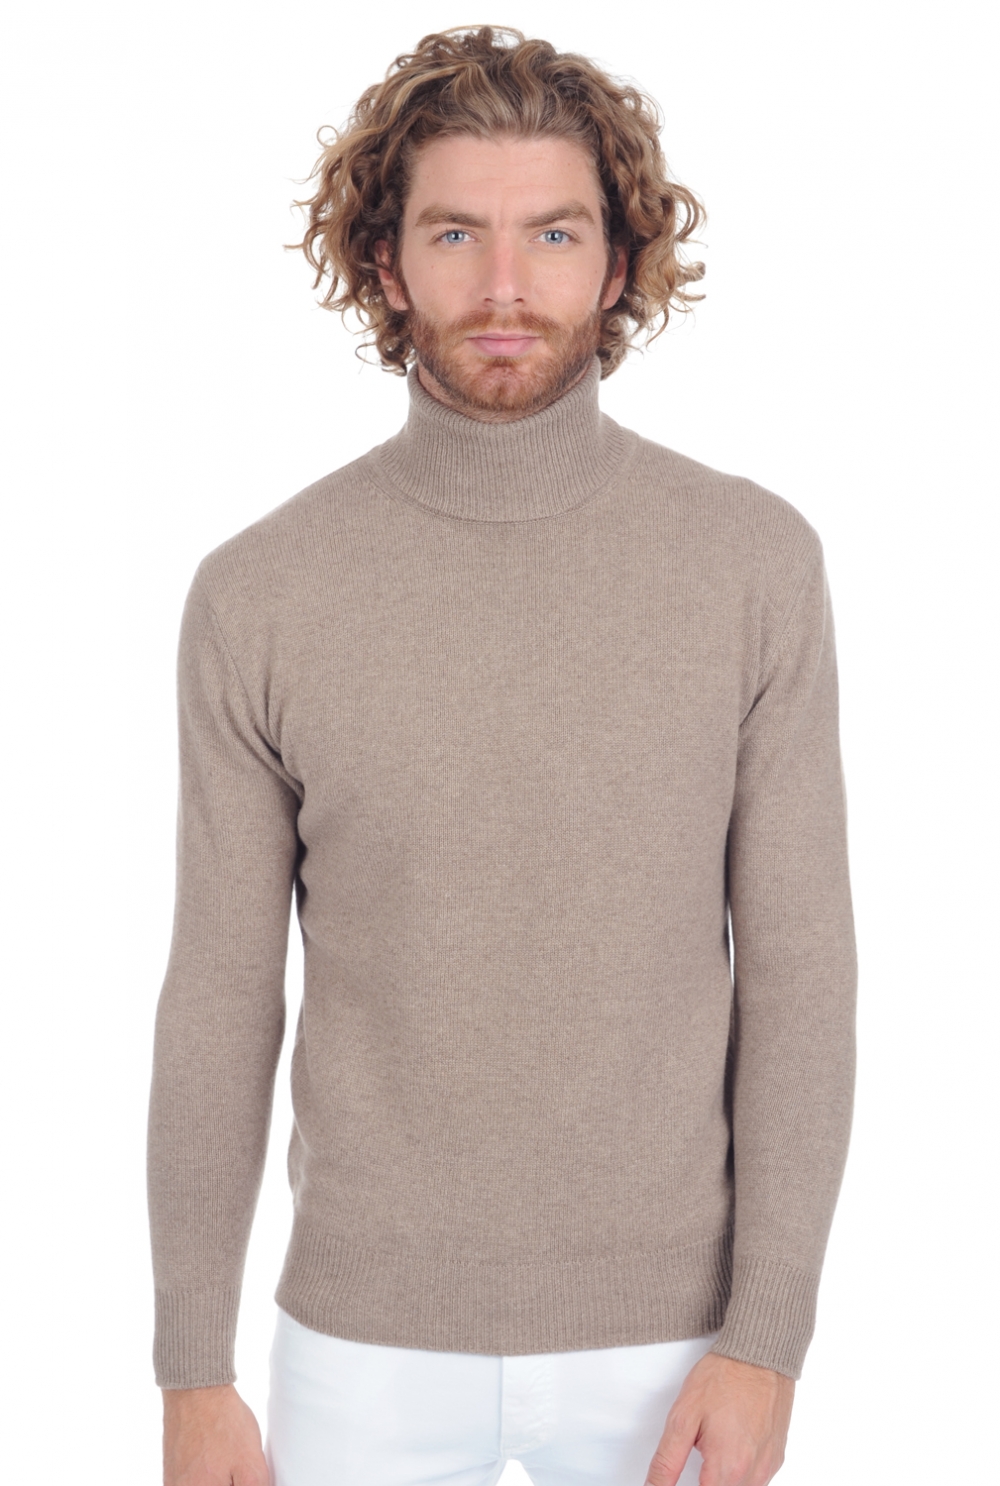 Cachemire pull homme col roule edgar 4f premium dolma natural xs